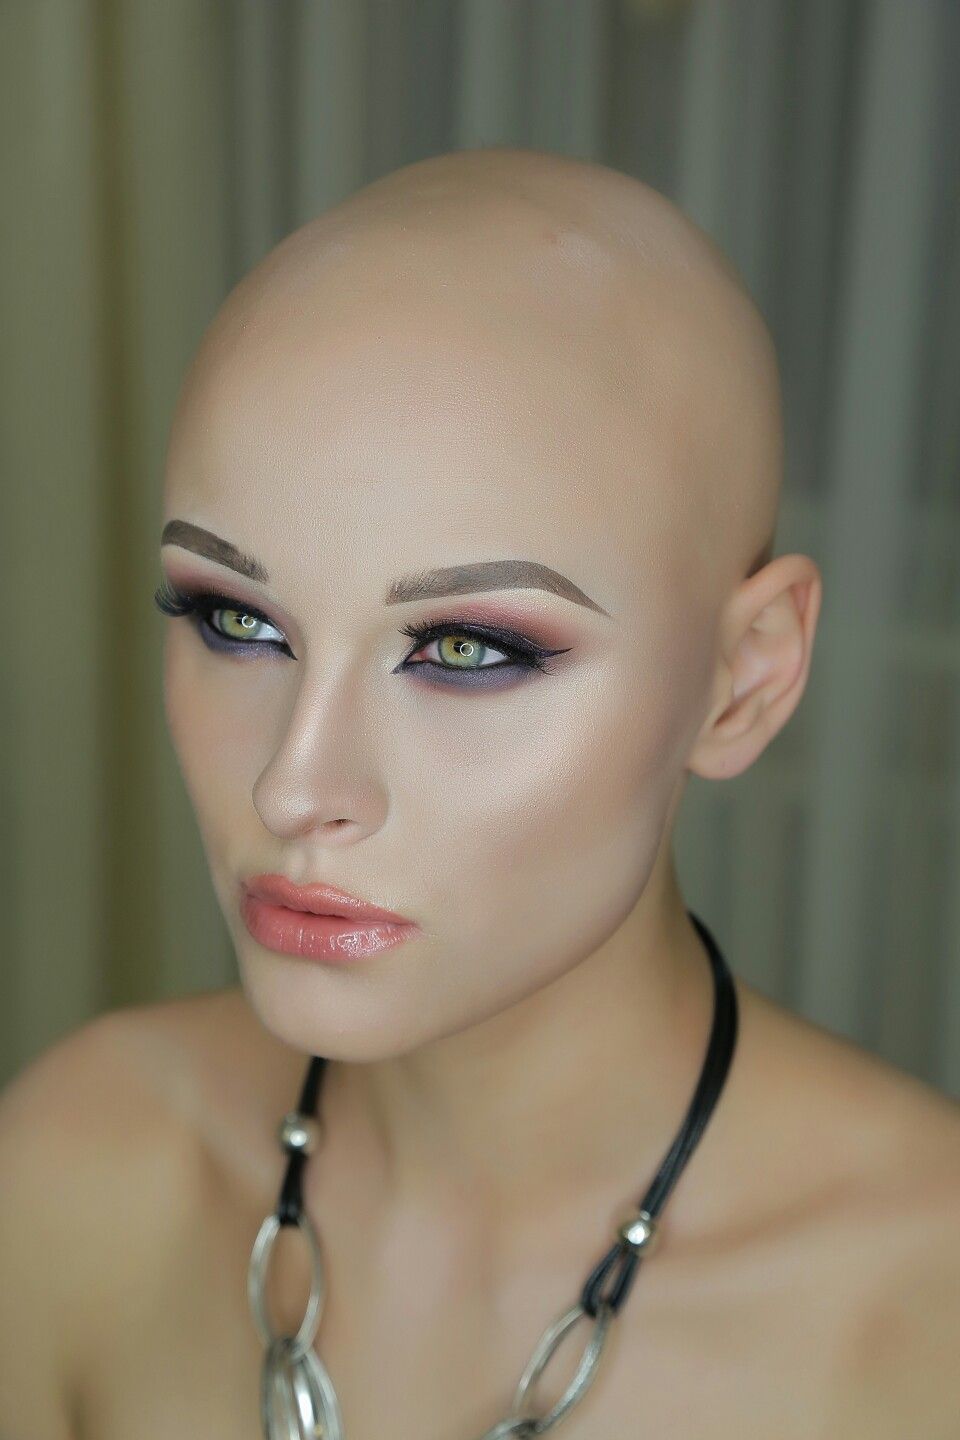 Breakdance reccomend Bald shaved females